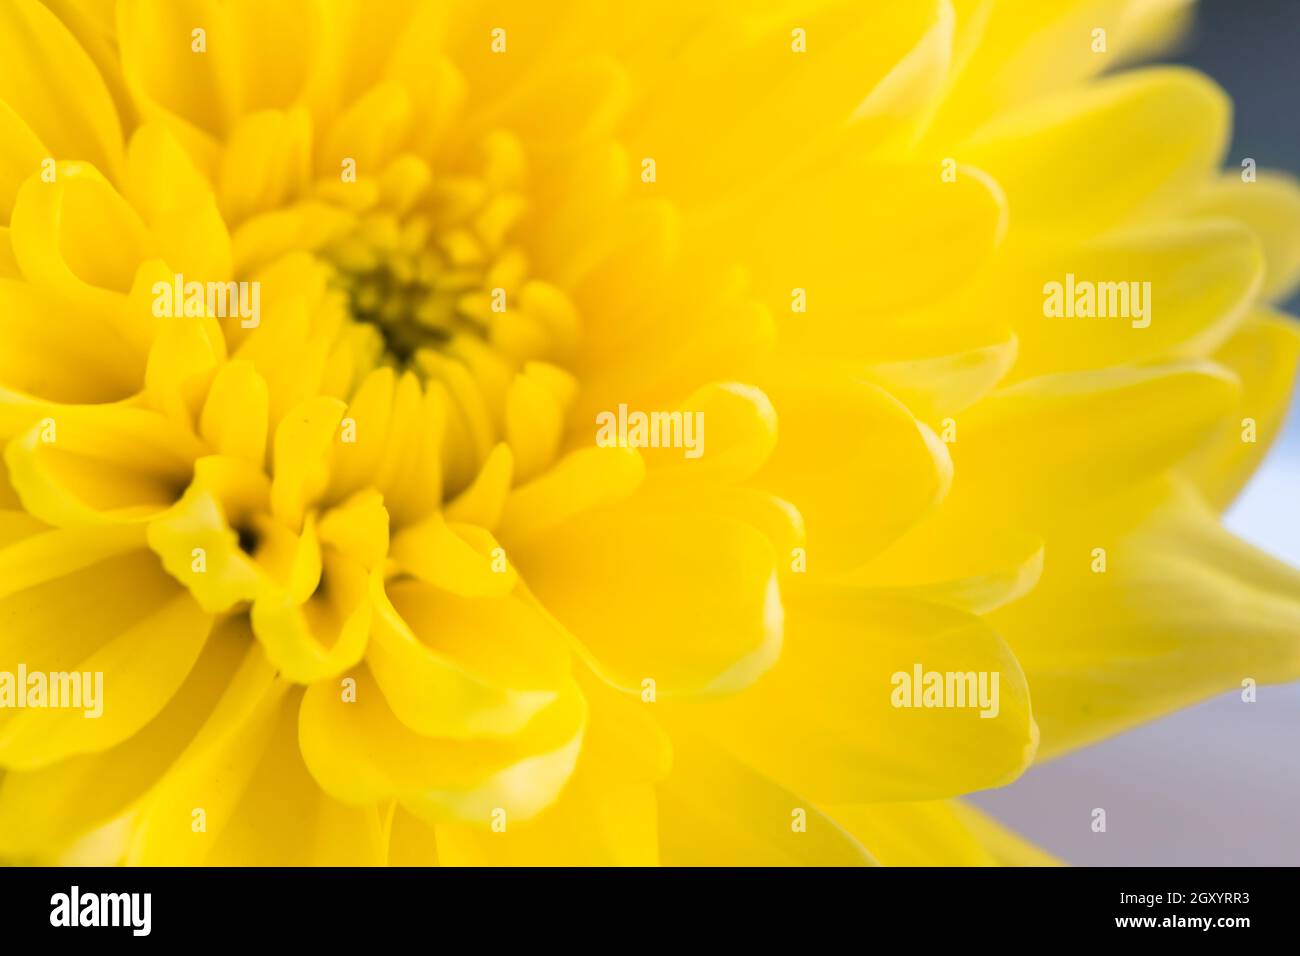 Blurred flower background with amazing yellow chrysanthemums Stock Photo